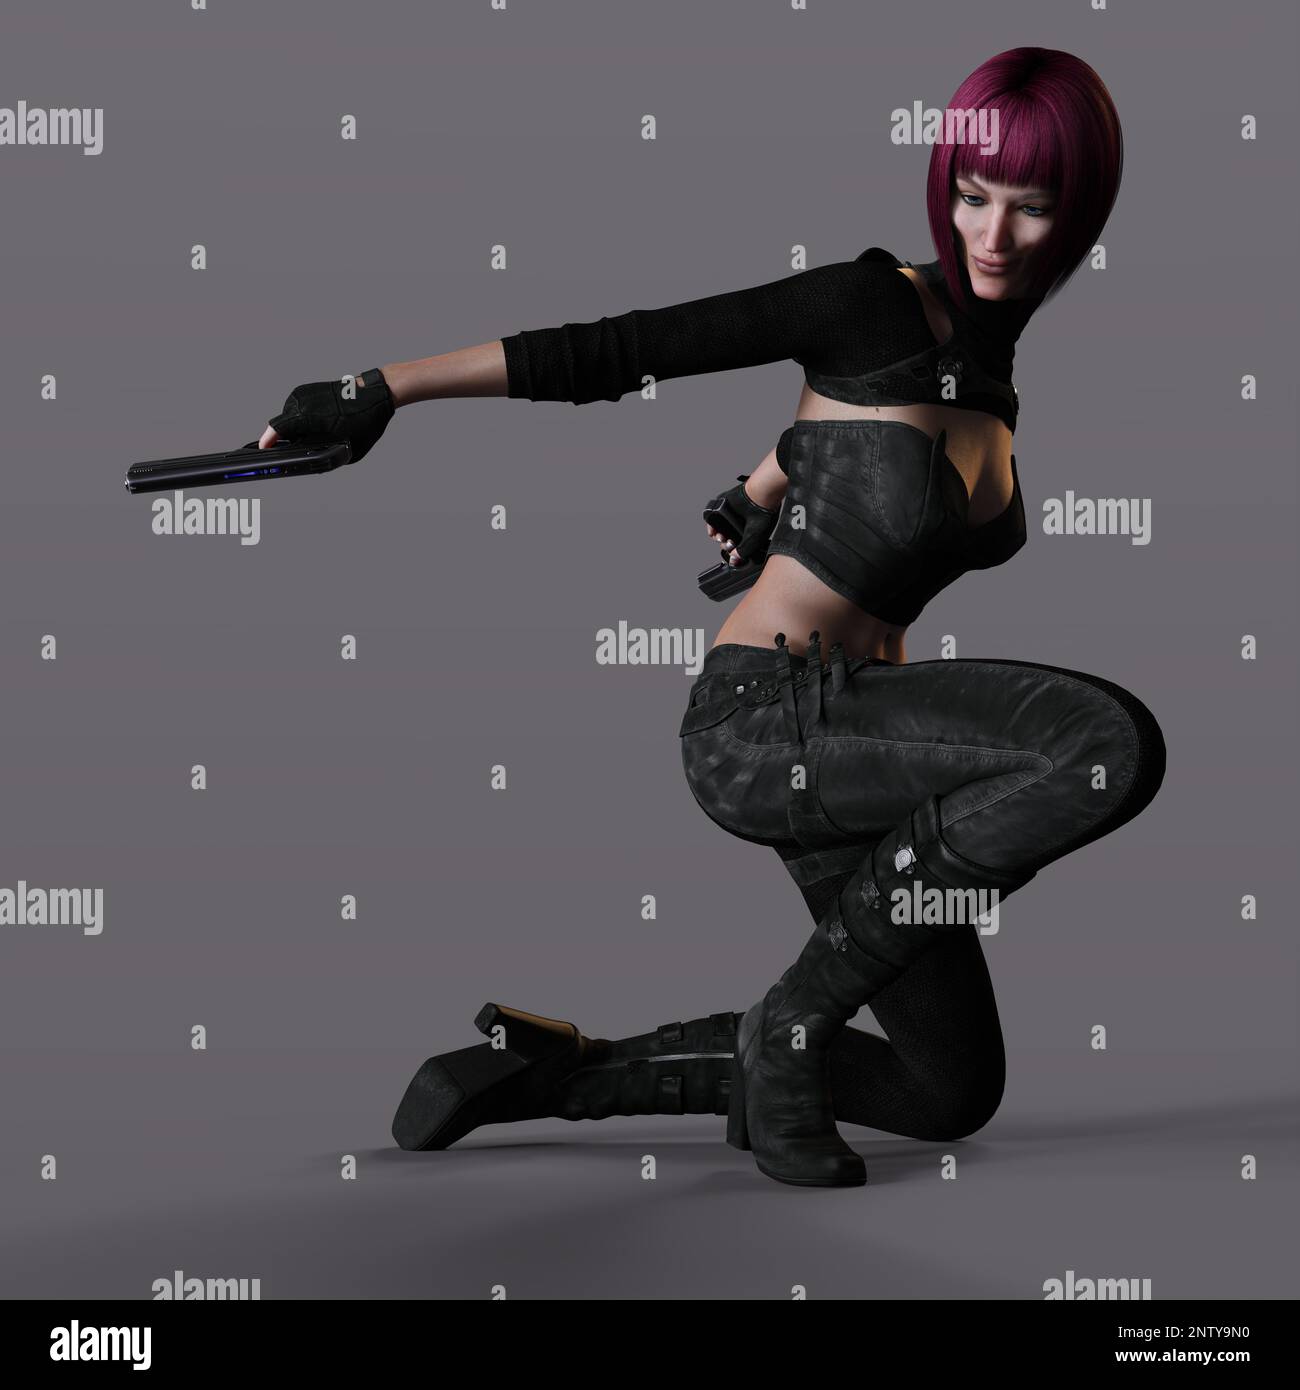 3D-illustration of an female rogutlike ninja fighter fighter in a nanosuit with guns Stock Photo